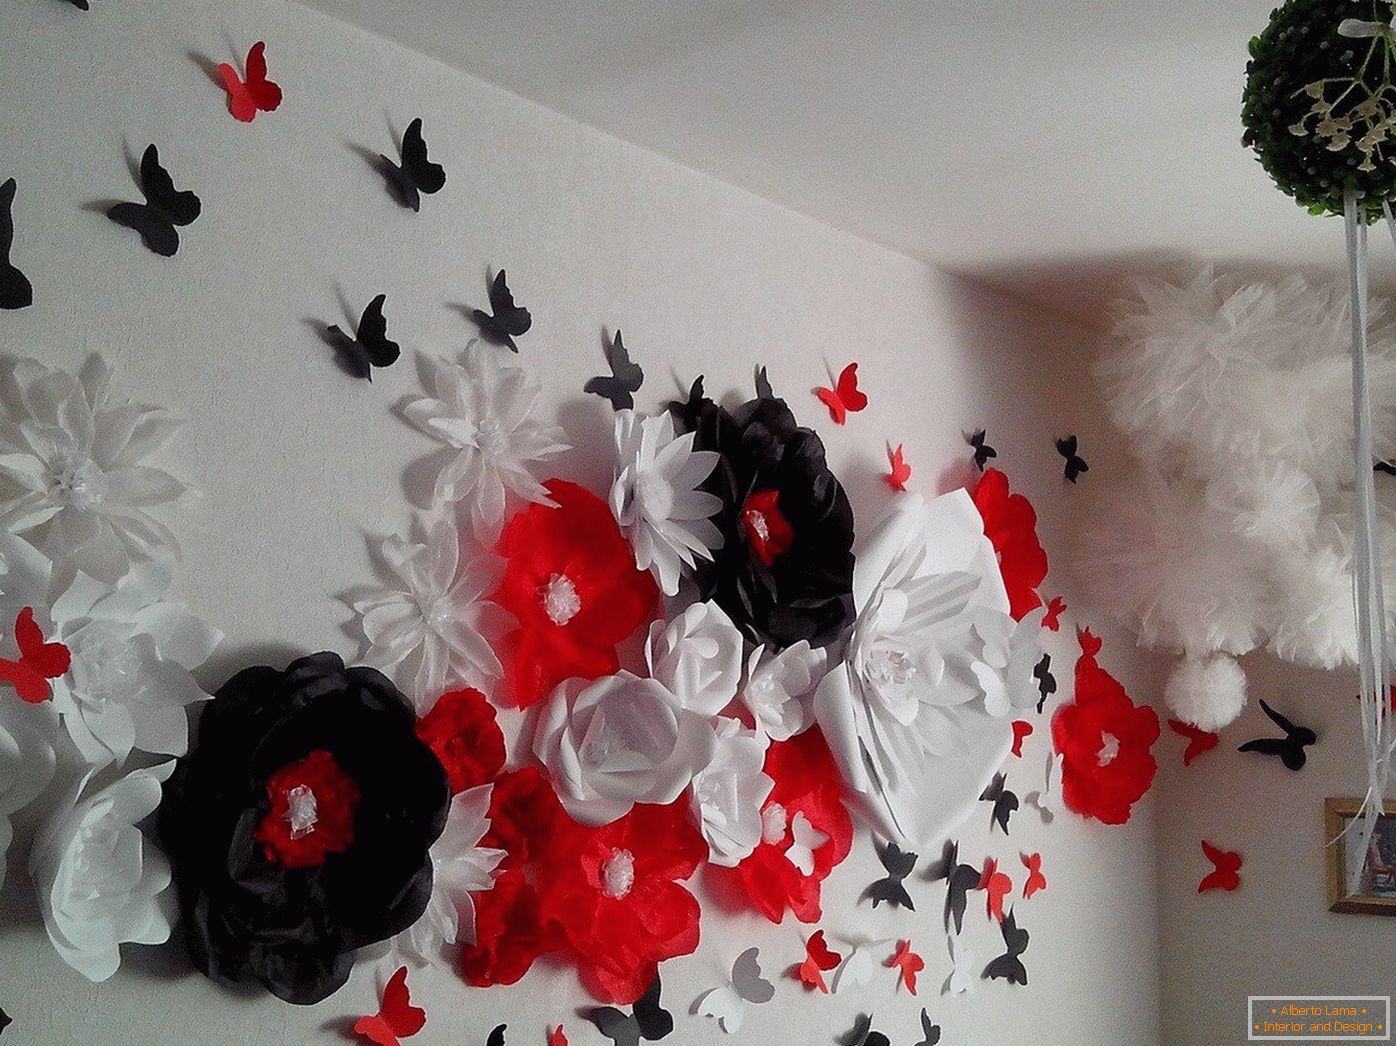 Flowers and butterflies on the wall